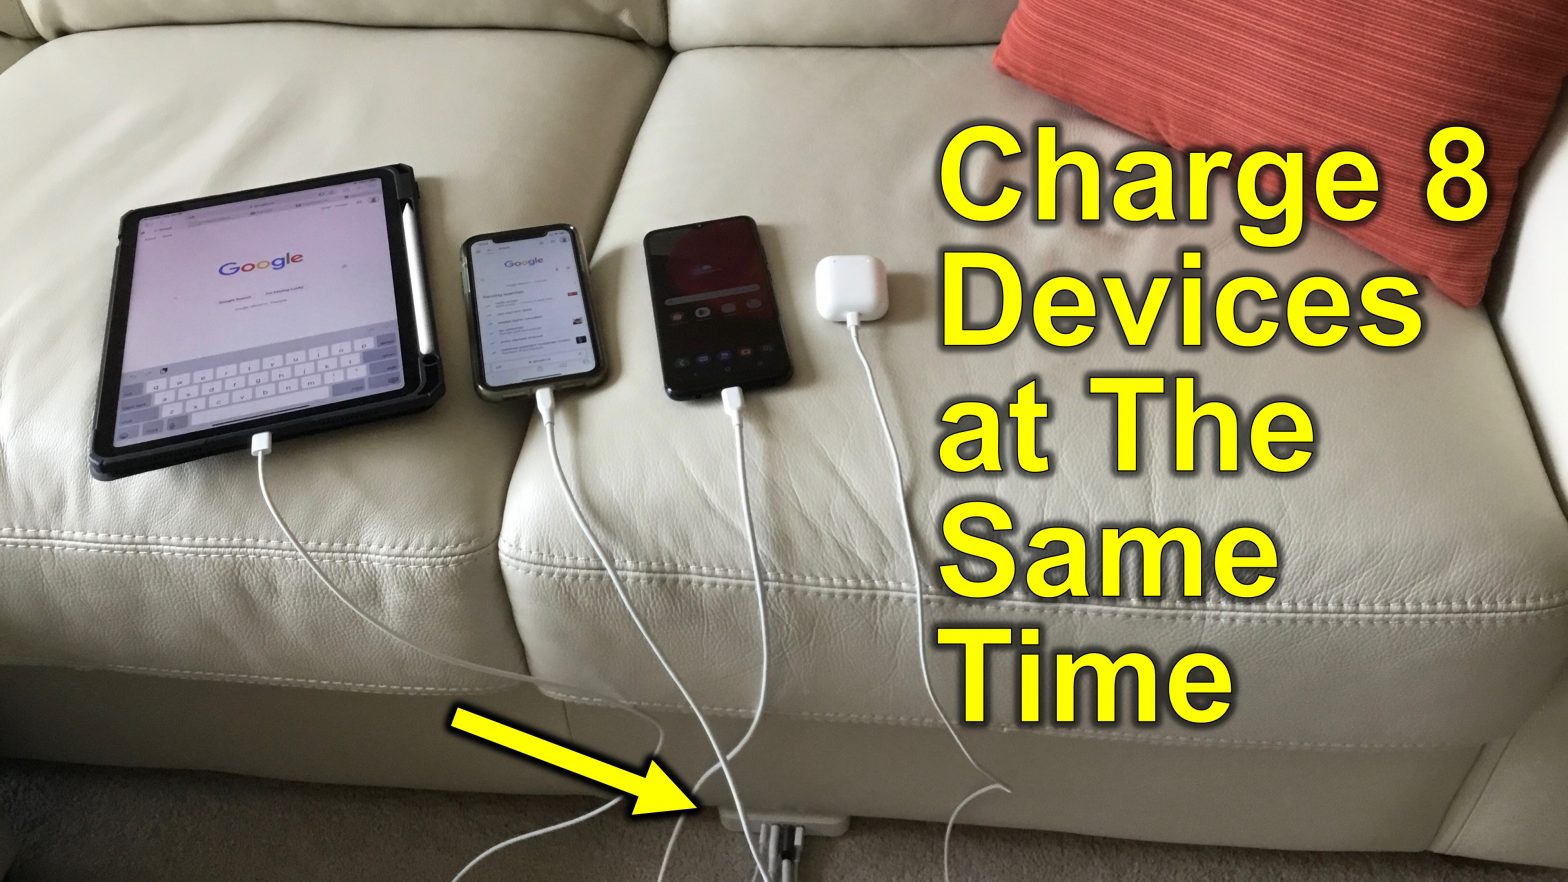 Simple device to charge phones, tablets, & other devices anywhere in your home